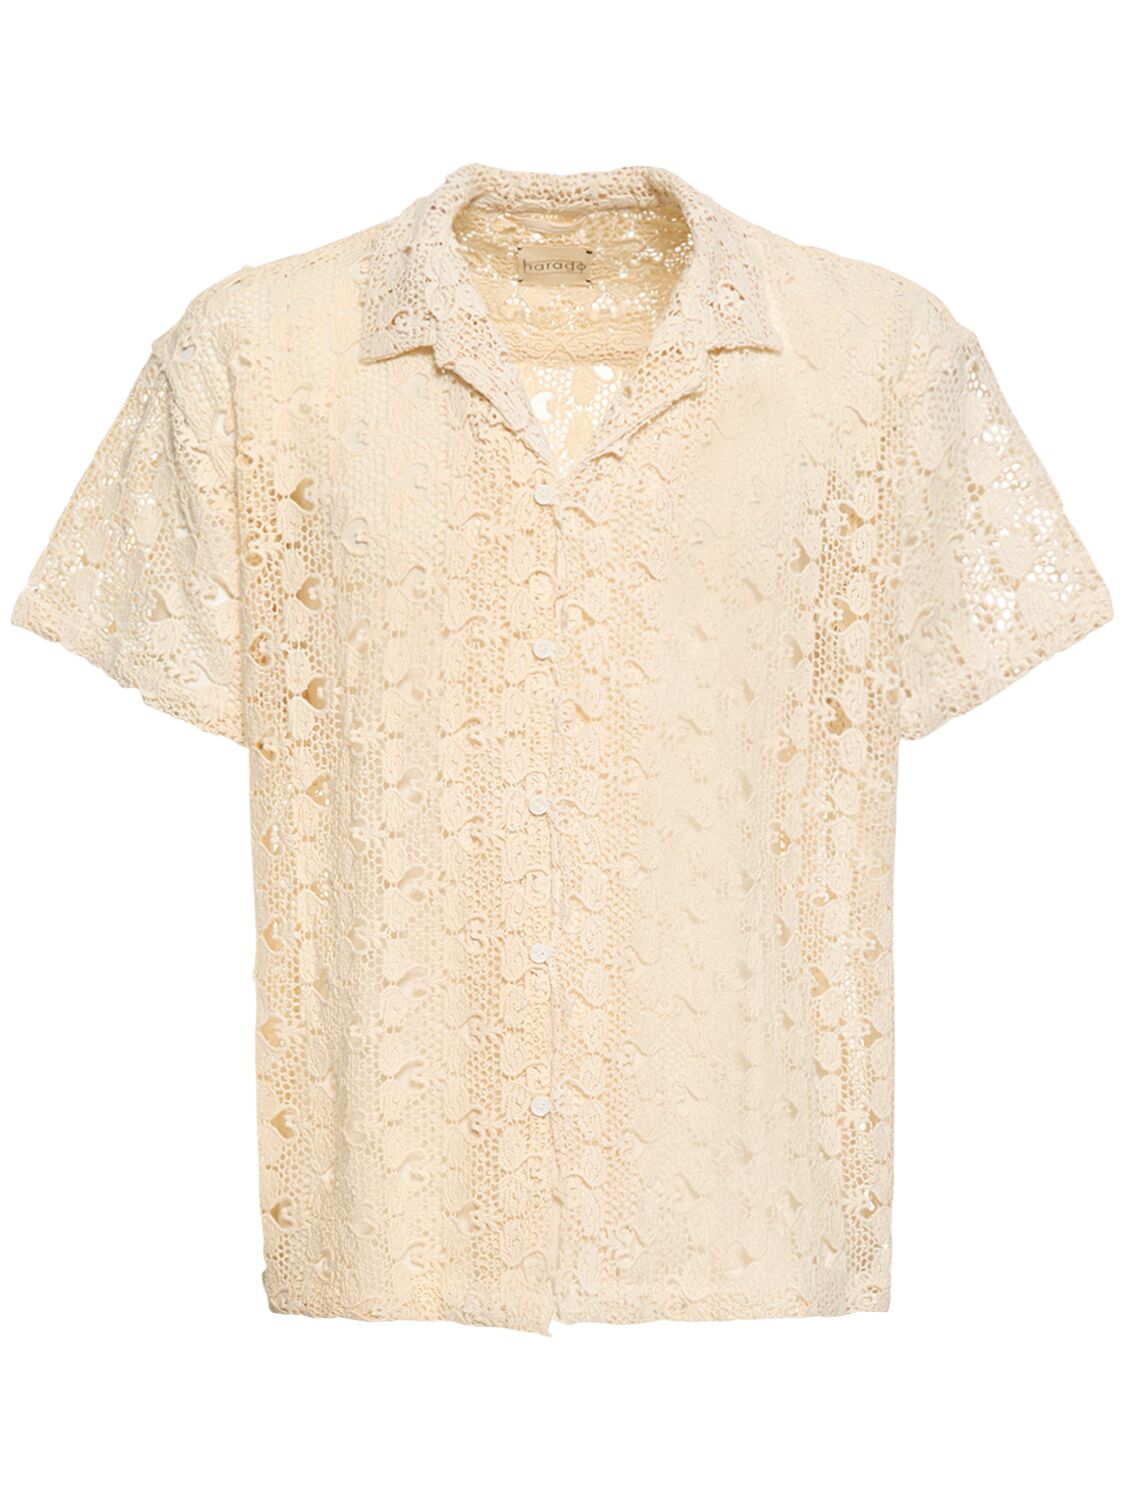 Harago Off-white Buttoned Shirt